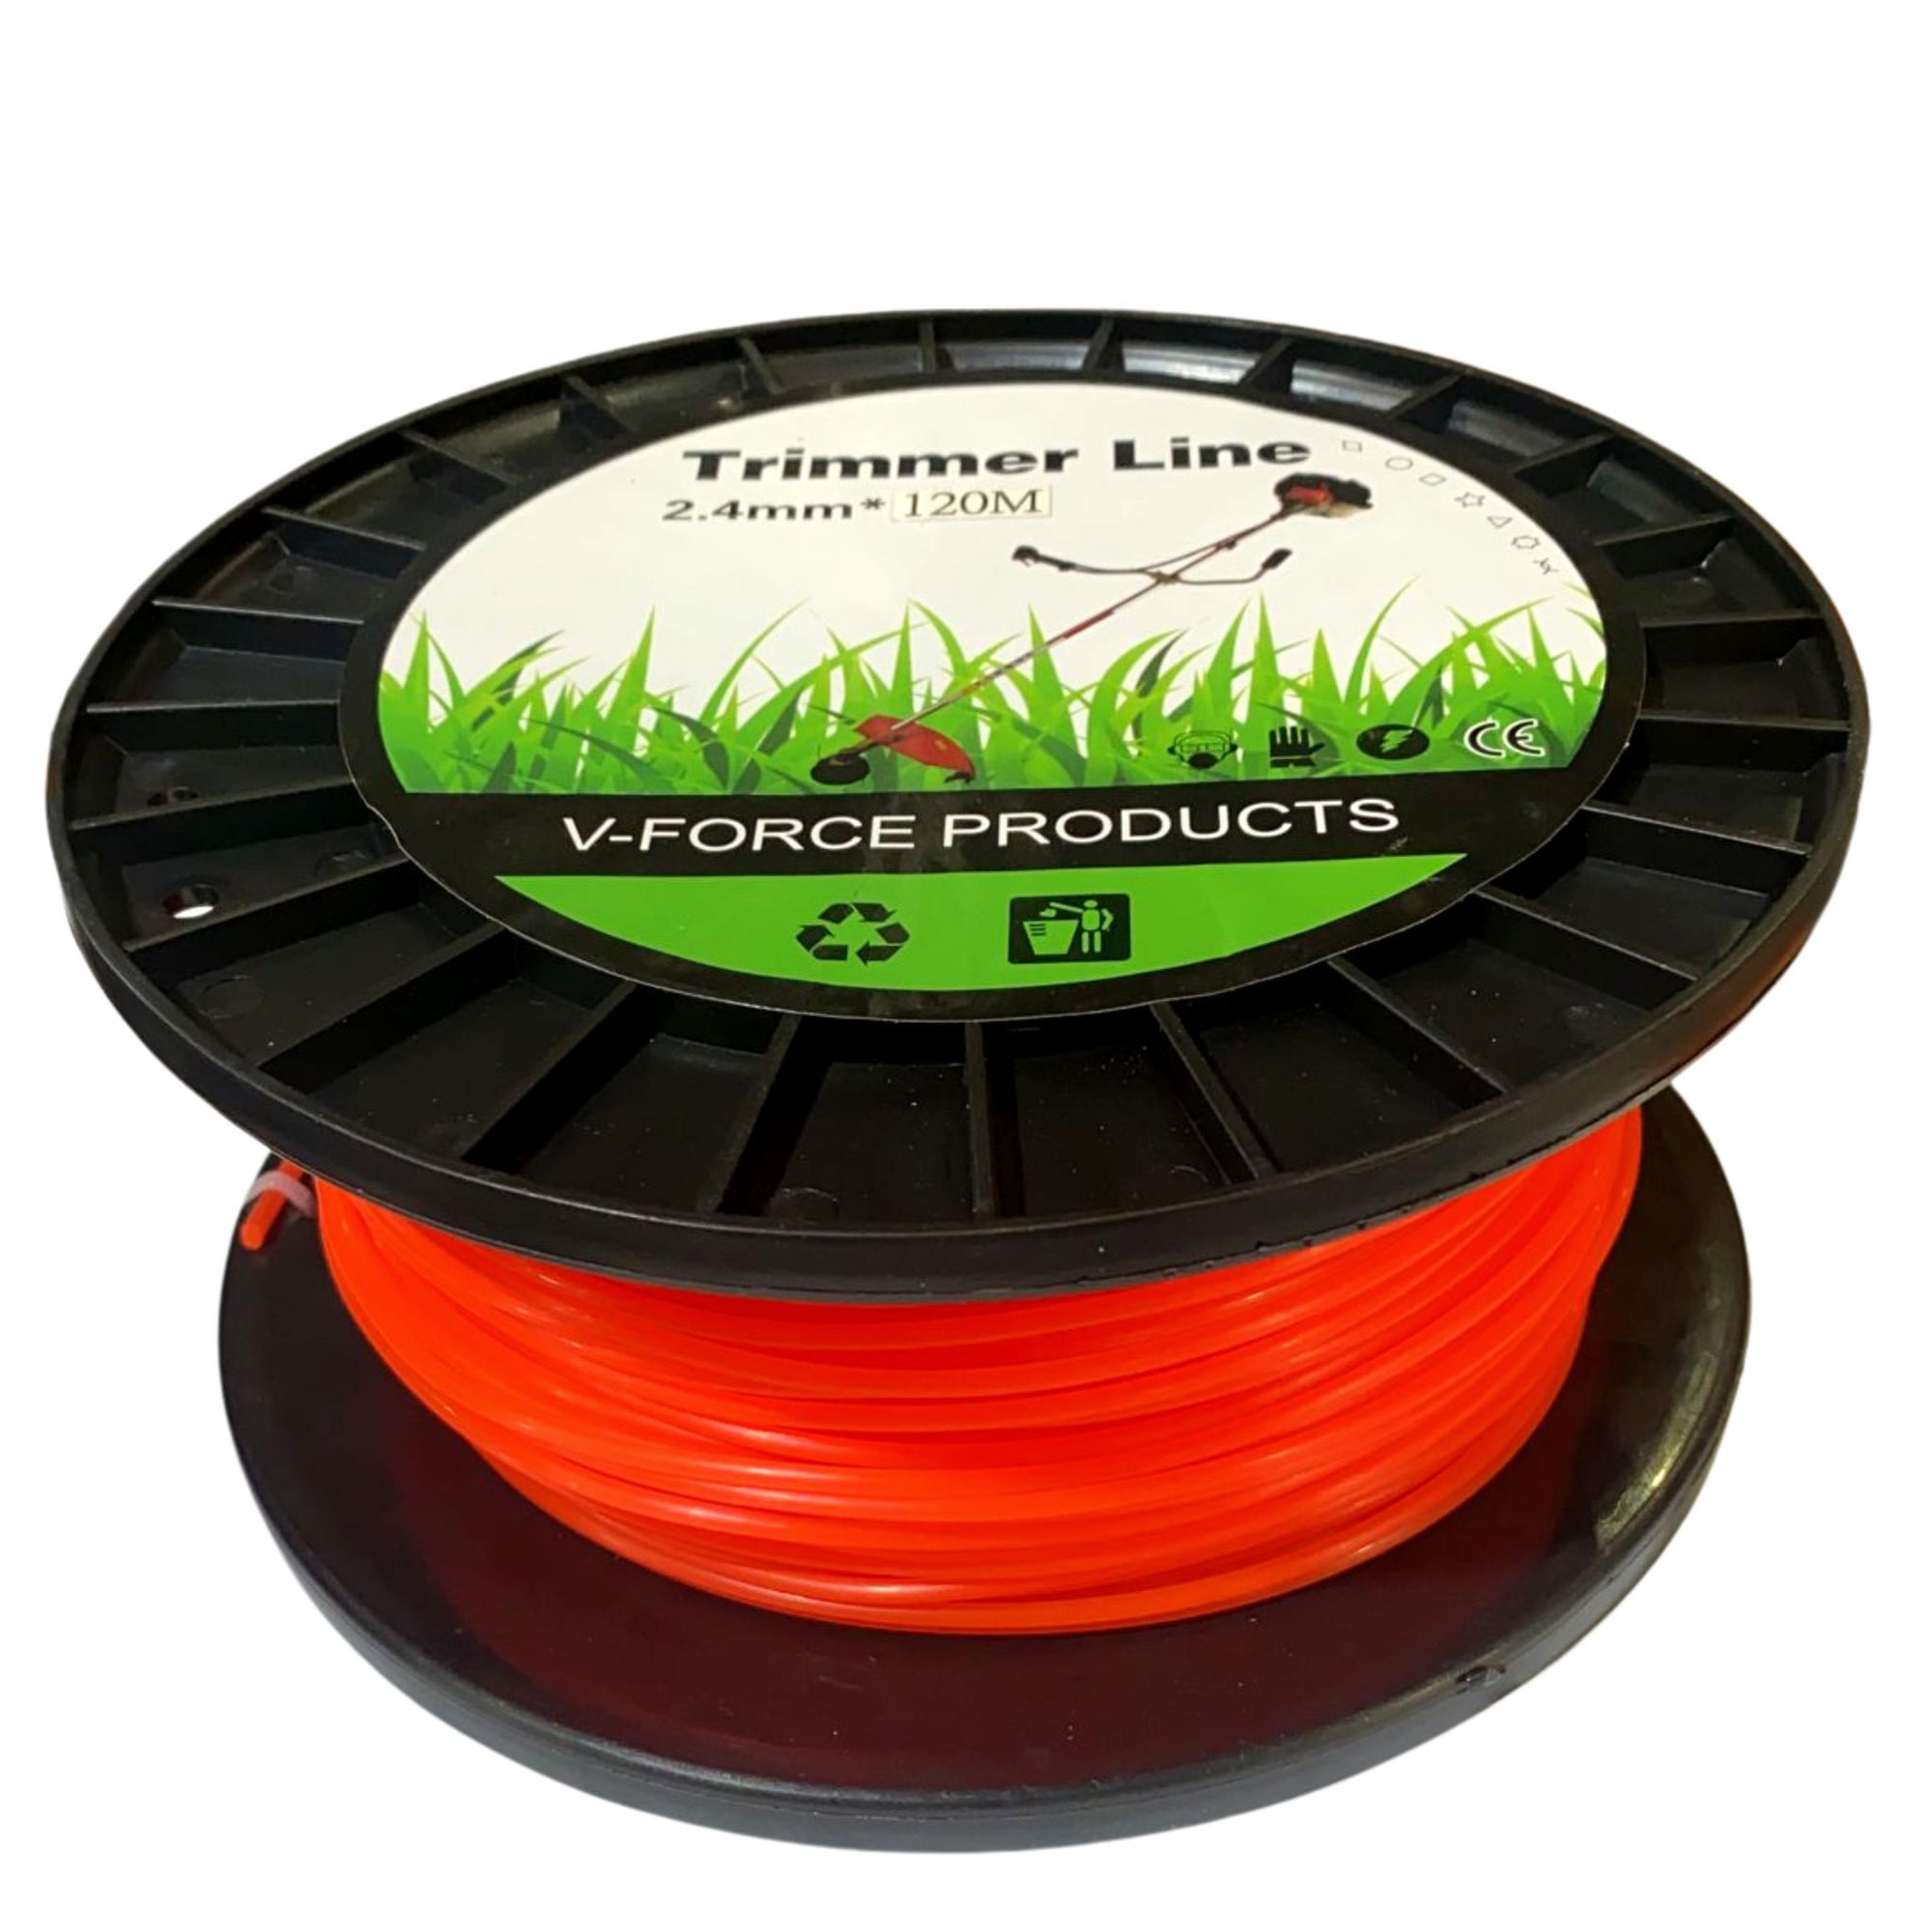 120m Heavy Duty Nylon String Trimmer Line - 120 metres | 2.4mm | ROUND - South East Clearance Centre